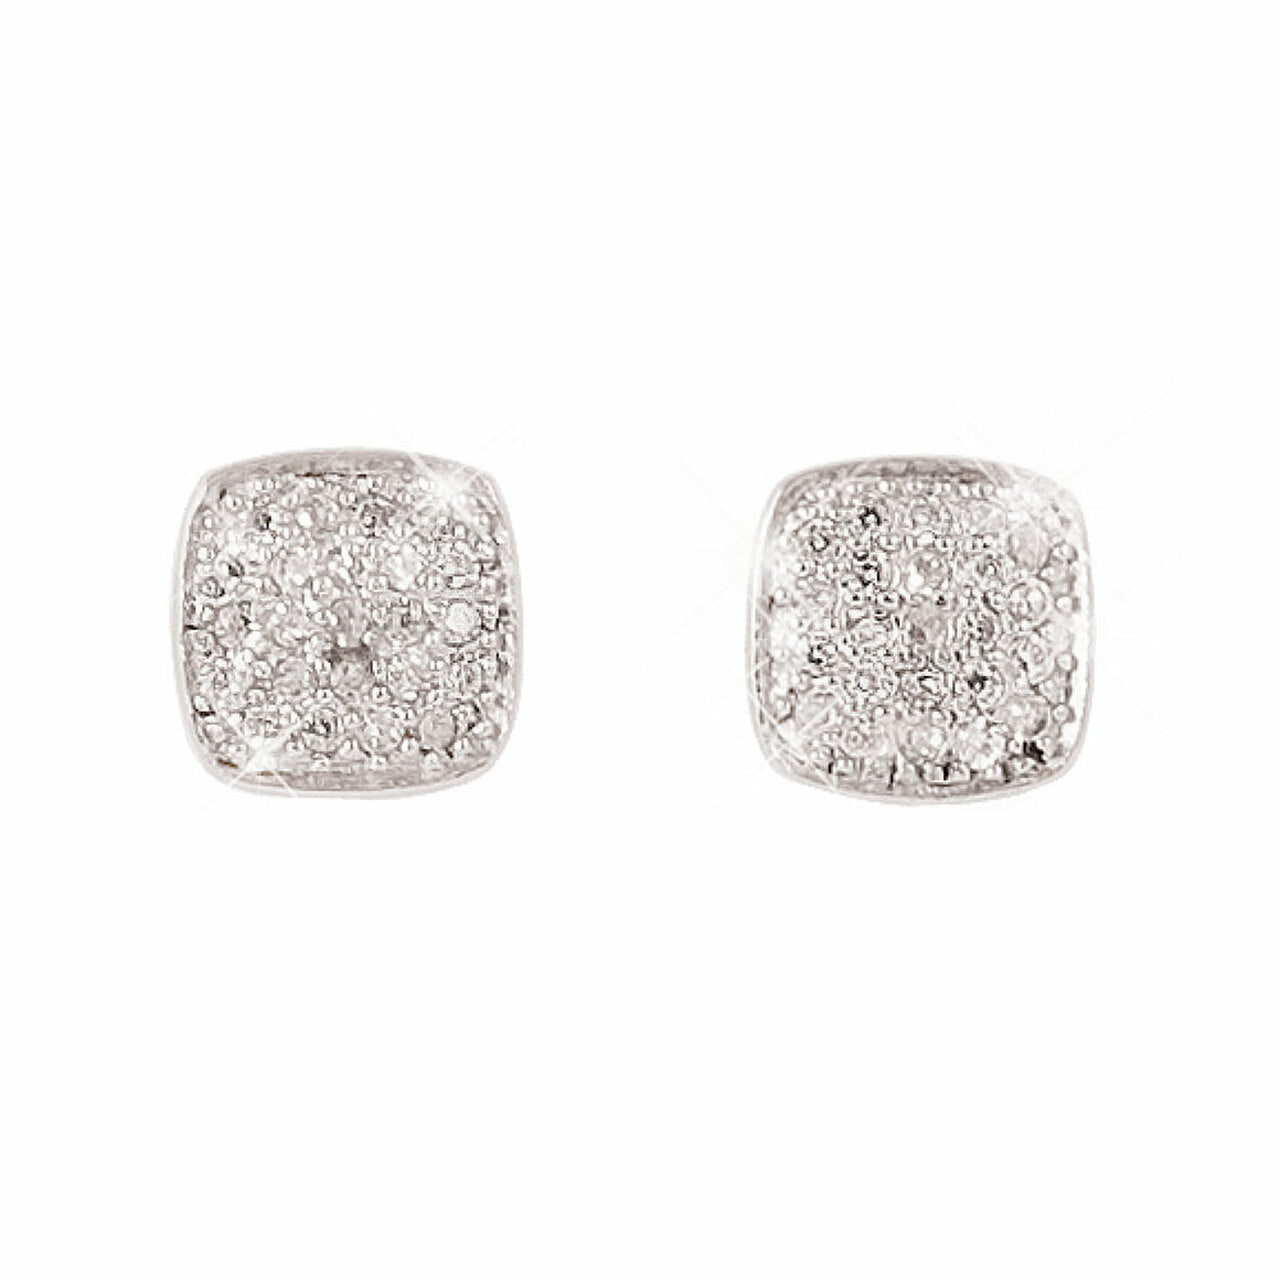 Tipperary Crystal Silver Earrings Pave Set Soft Edge Square